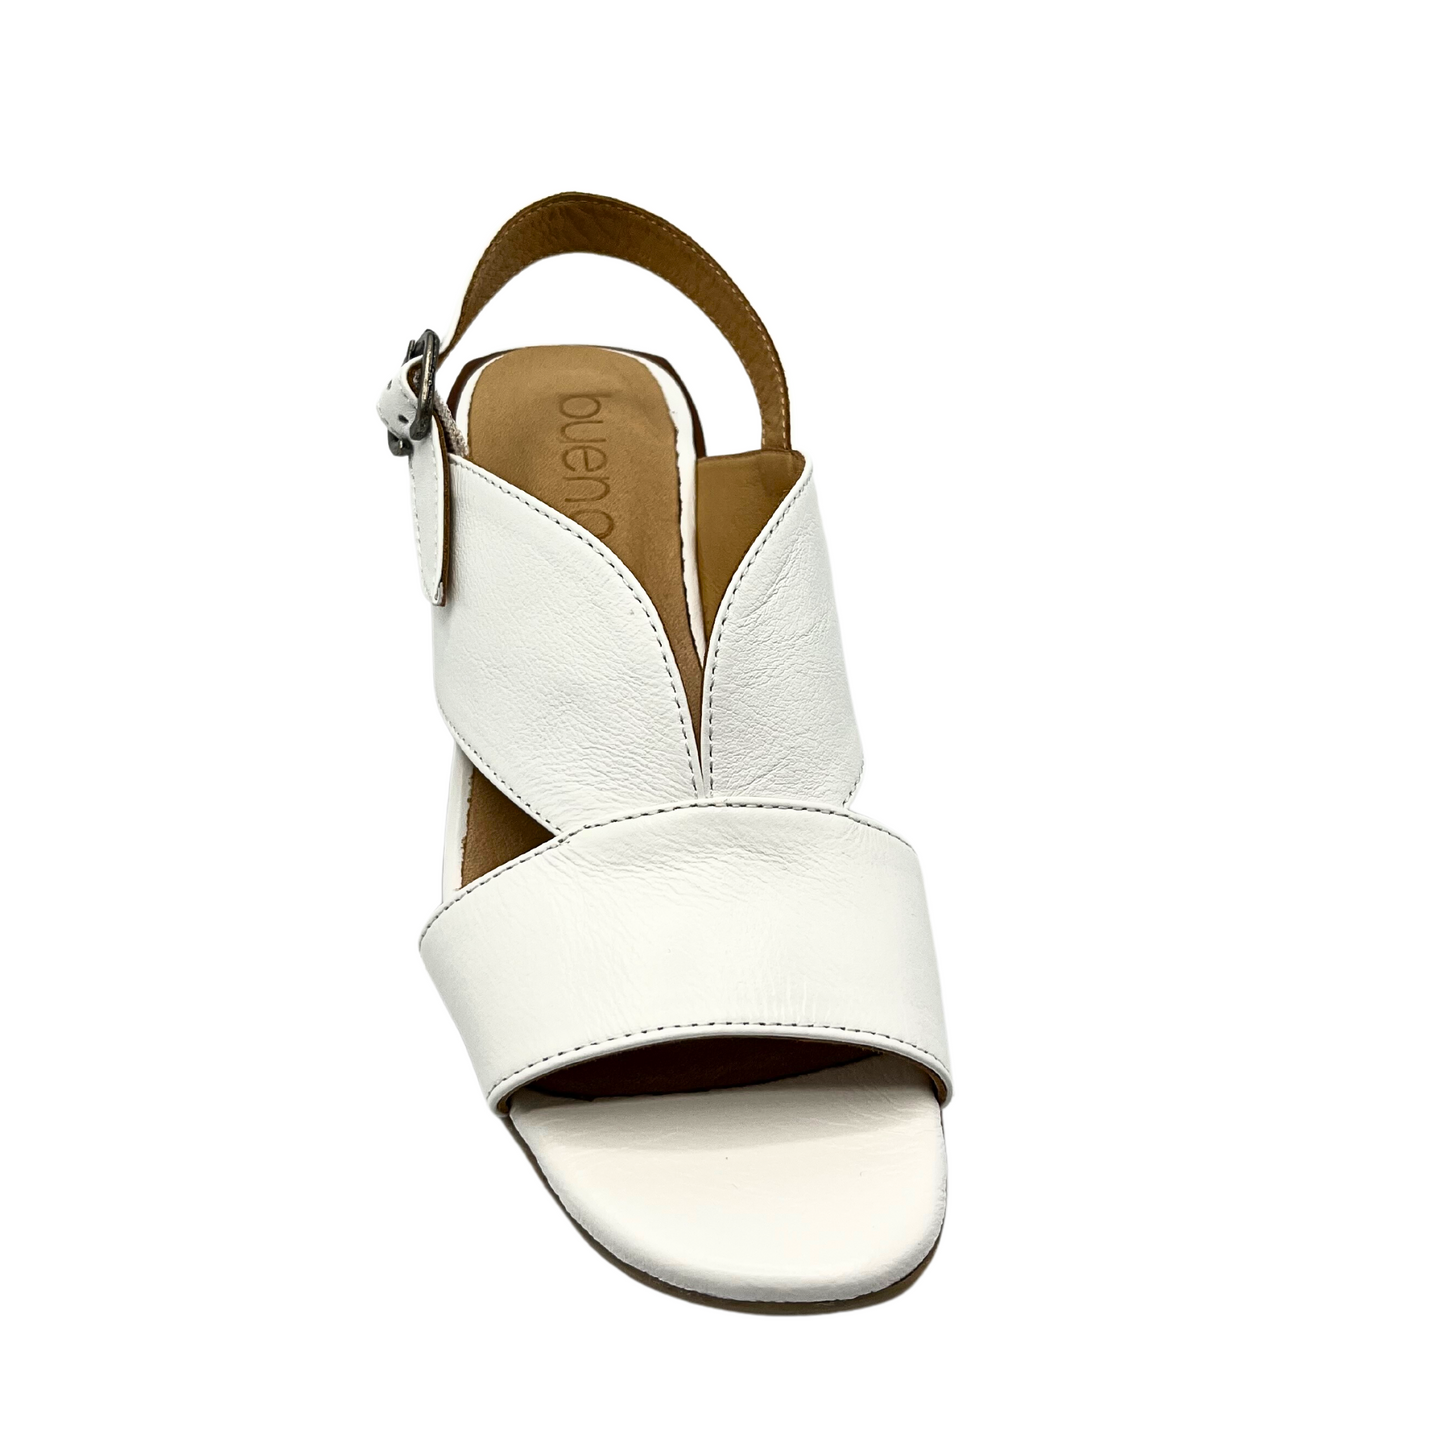 Top down view of classic white sandal.  Thick front strap and 2 curved straps coming up over the top of foot and connecting to an adjustable heel strap